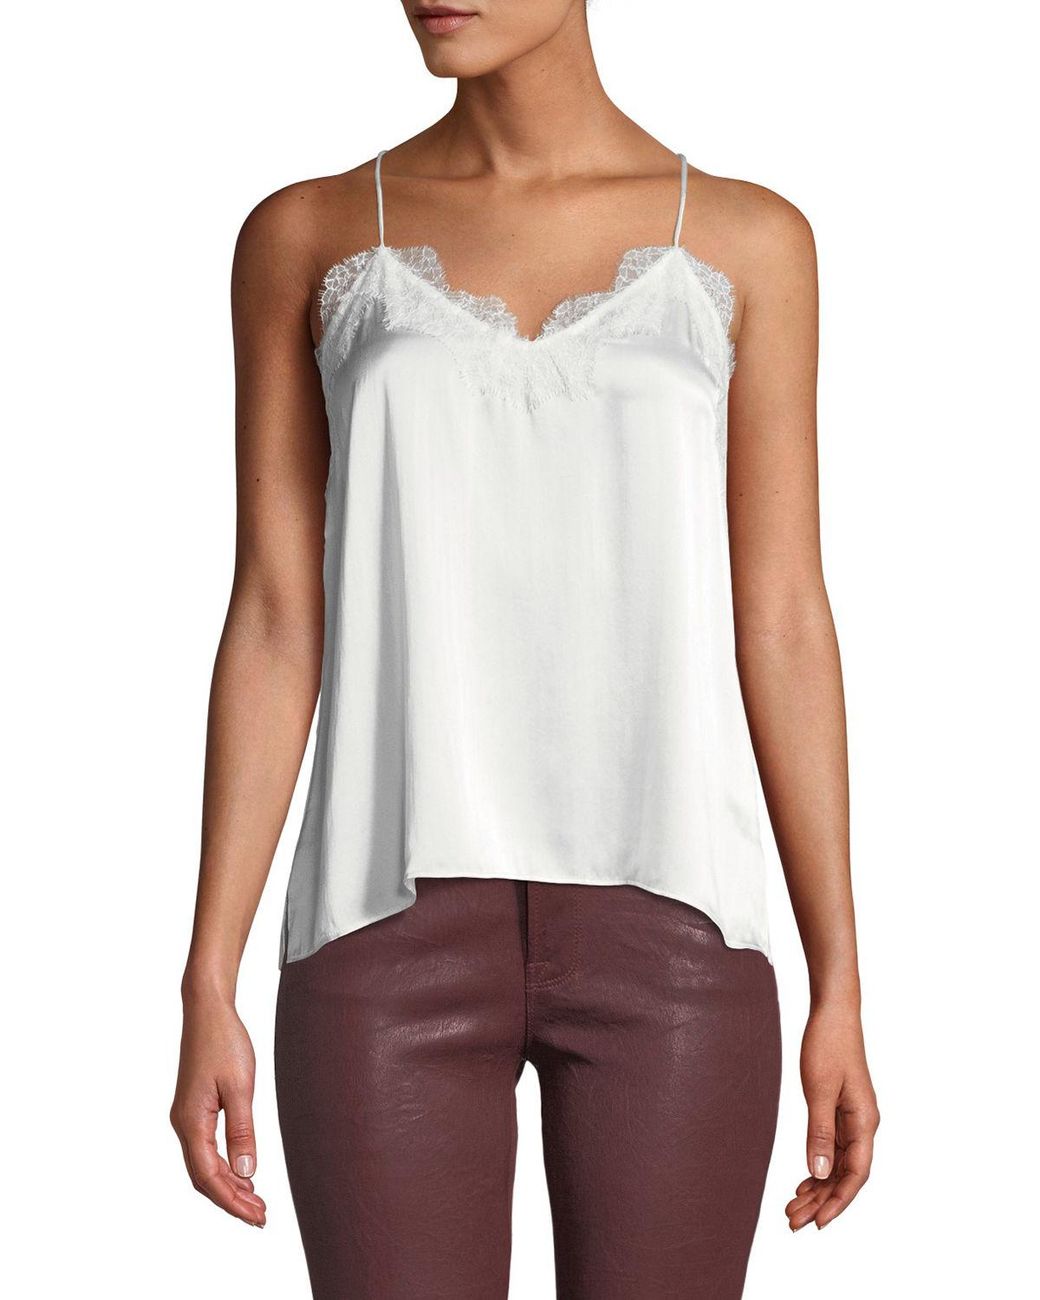 Cami NYC Racer Silk Charmeuse Camisole in White - Save 4% - Lyst